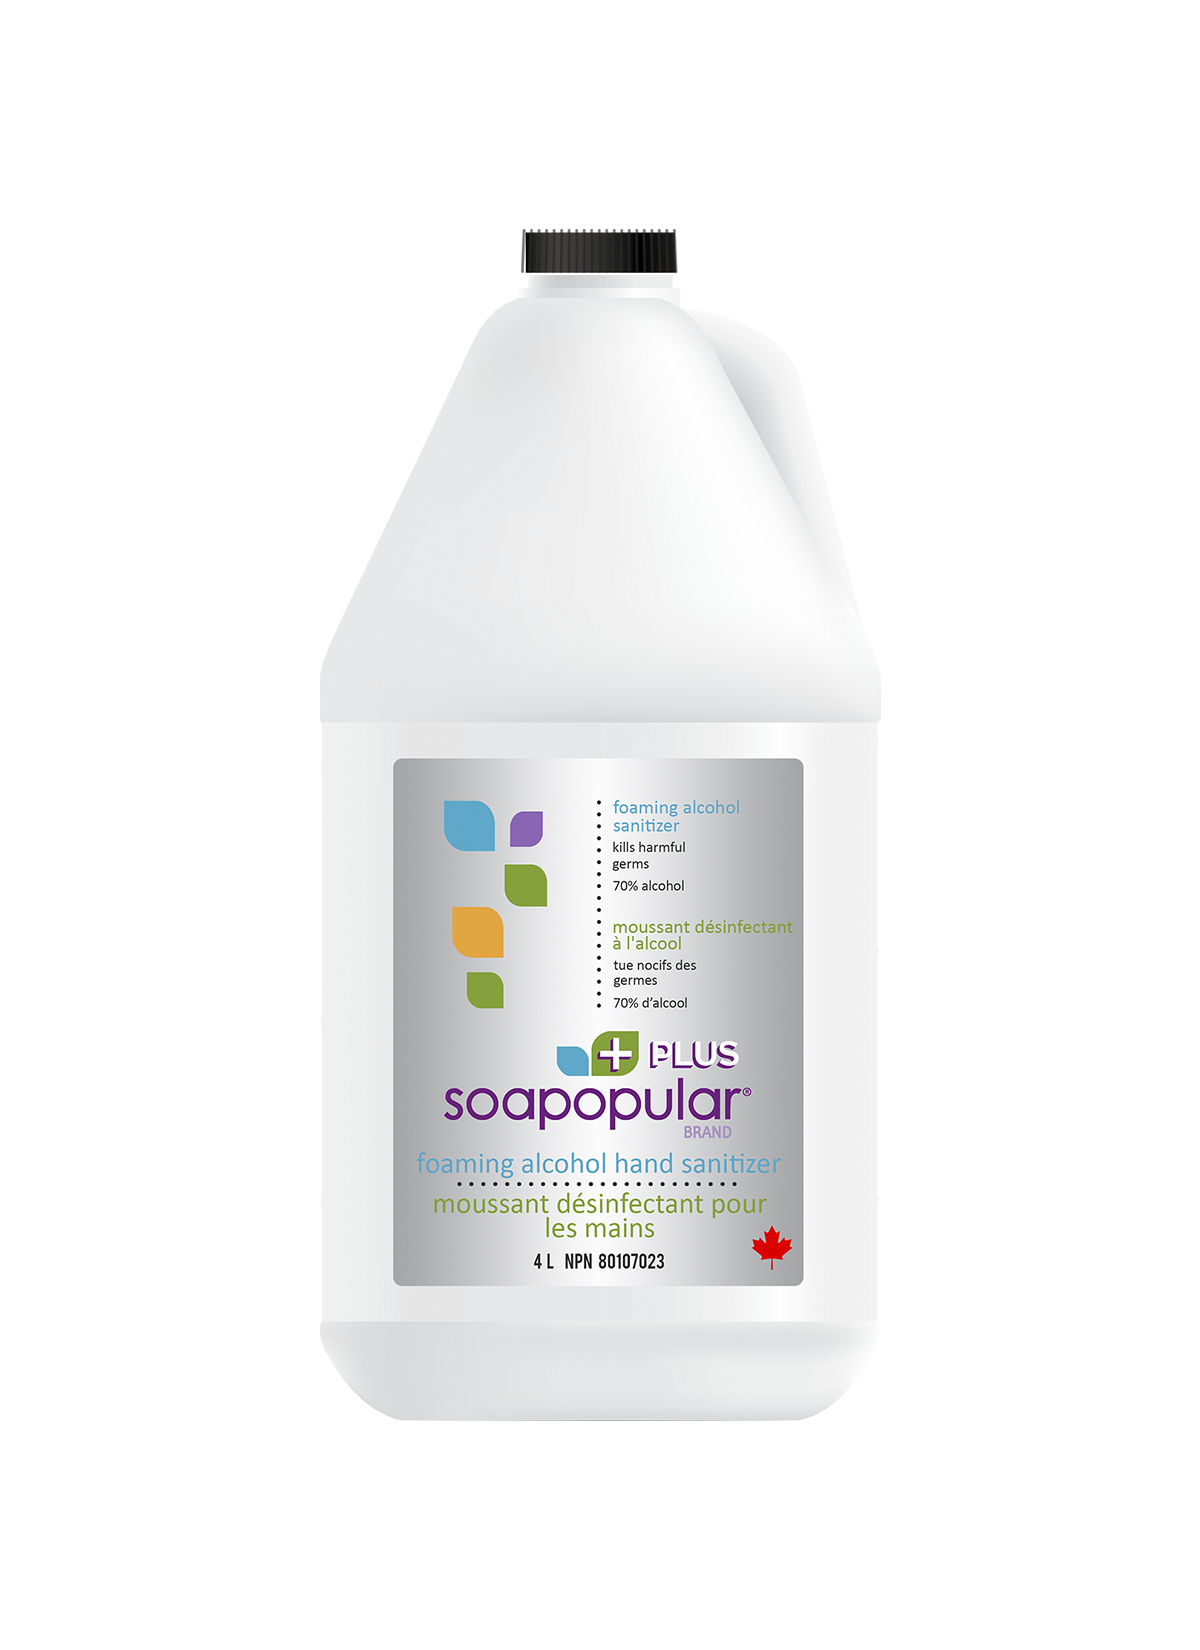 Soapopular 70% alcohol foaming hand sanitizer bulk-fill jug can be used to refill empty automatic and manual dispensers.